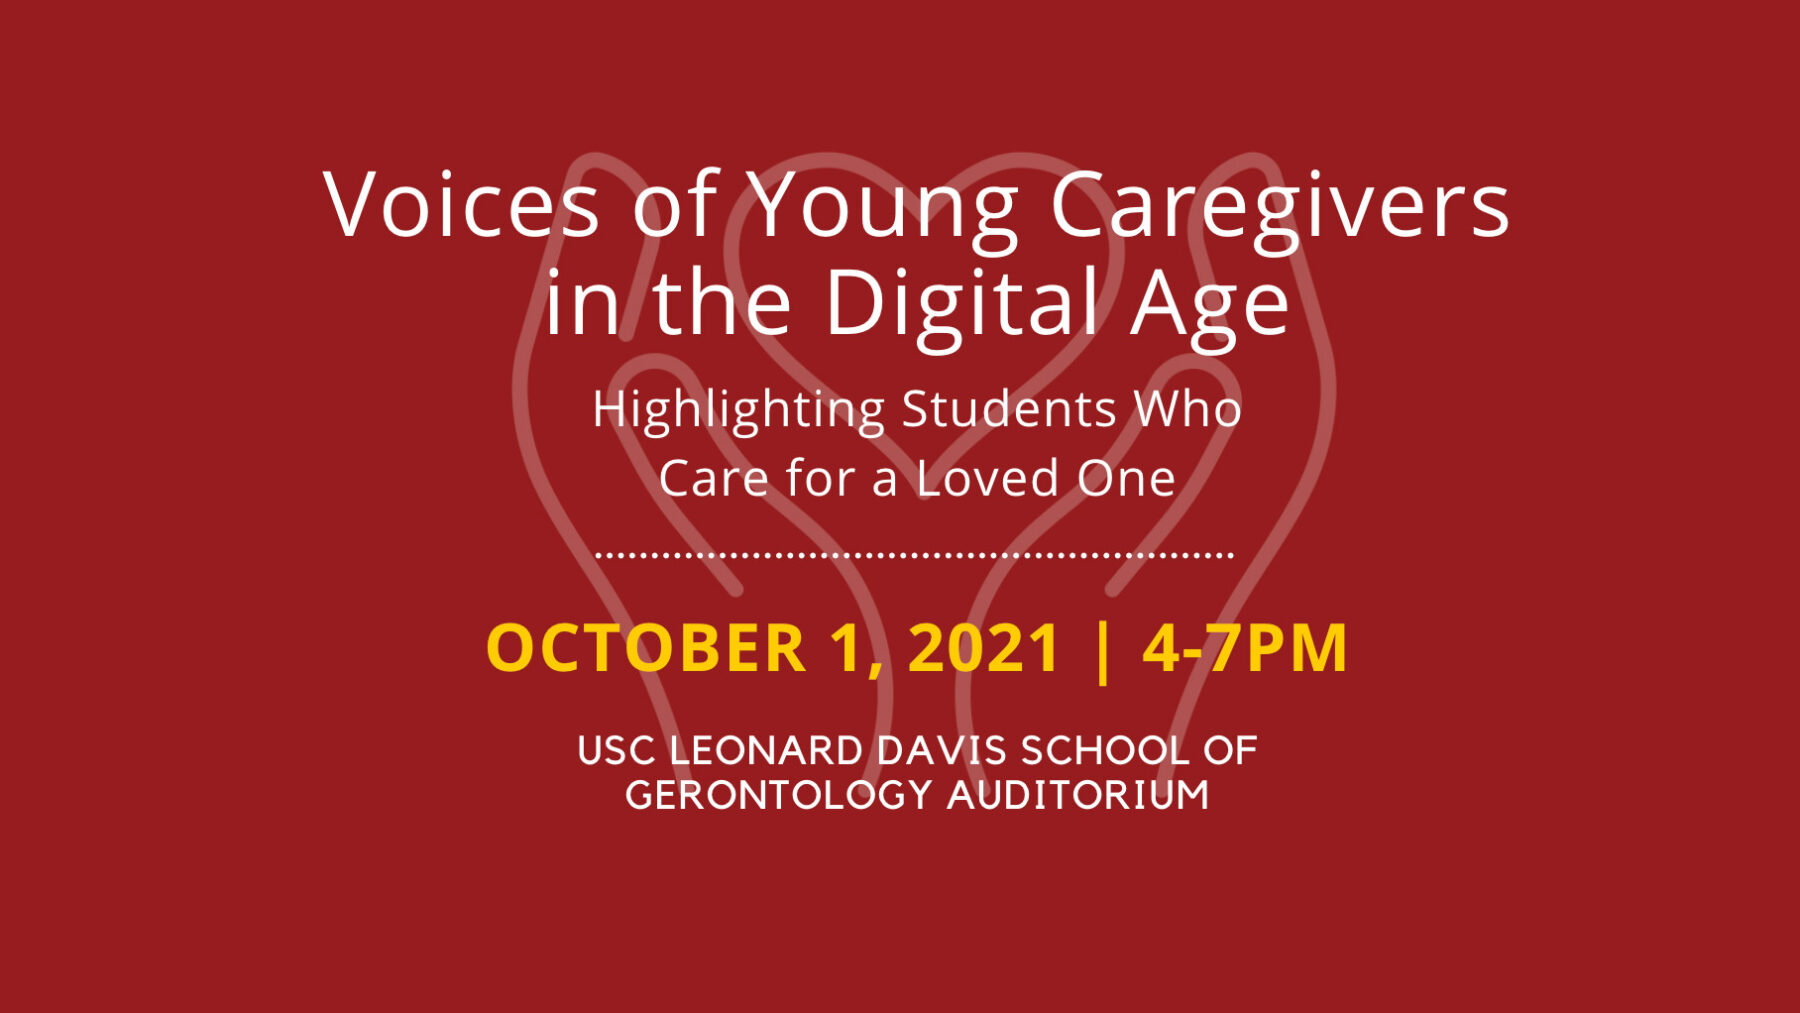 Event flyer for Voices of Young Caregivers in the Digital Age